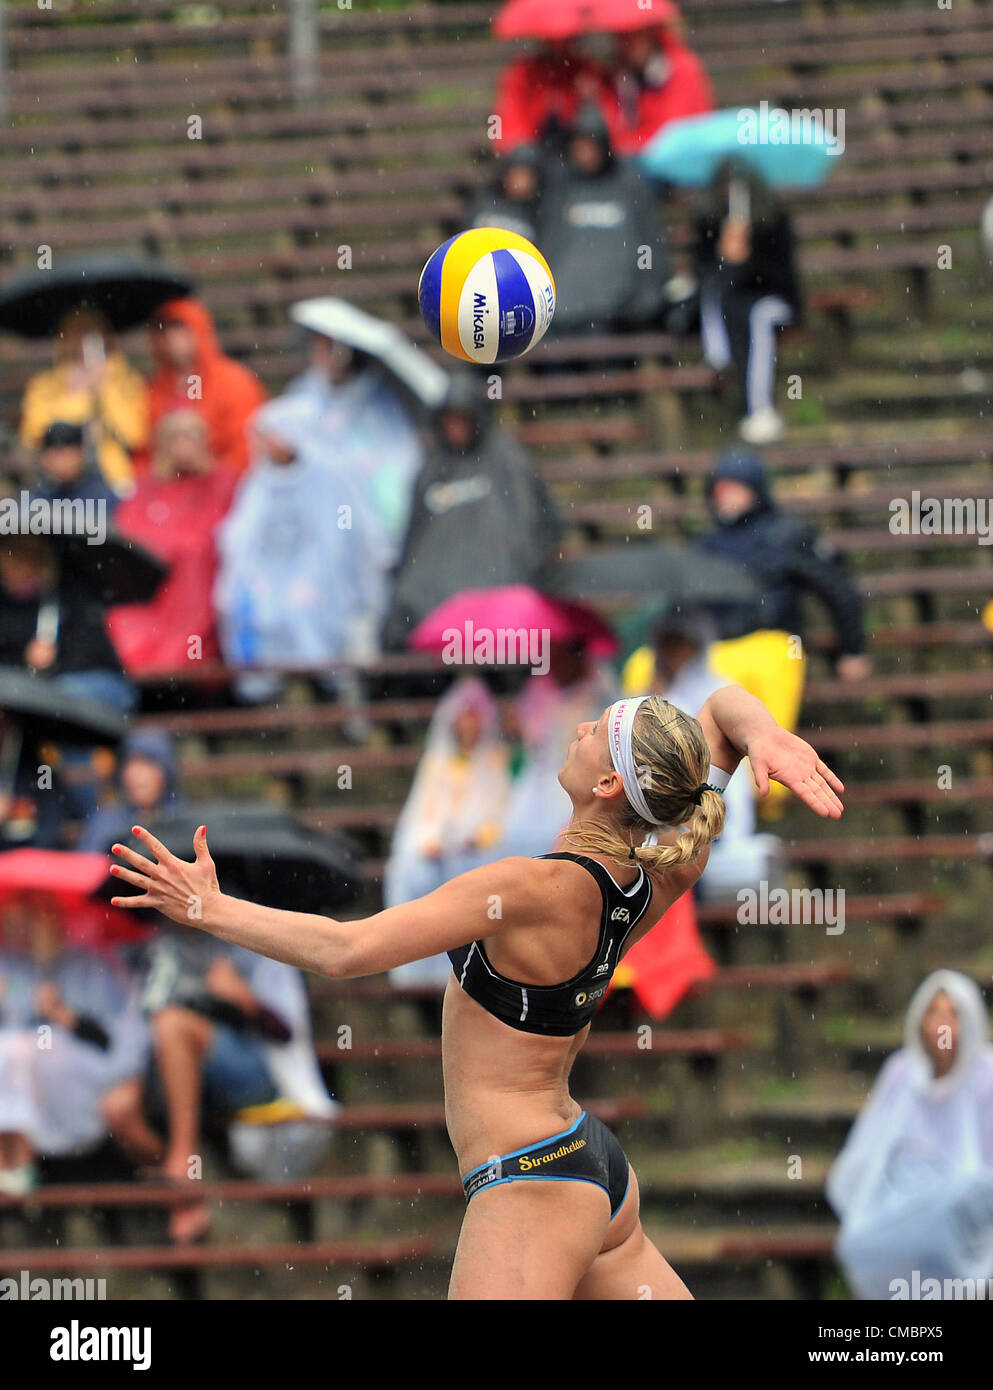 12.07.2012. Berlin, Germany. Beach-Volleyball Grand Slam 2012. The German Olympic Volleyball player Karla Borger Stock Photo